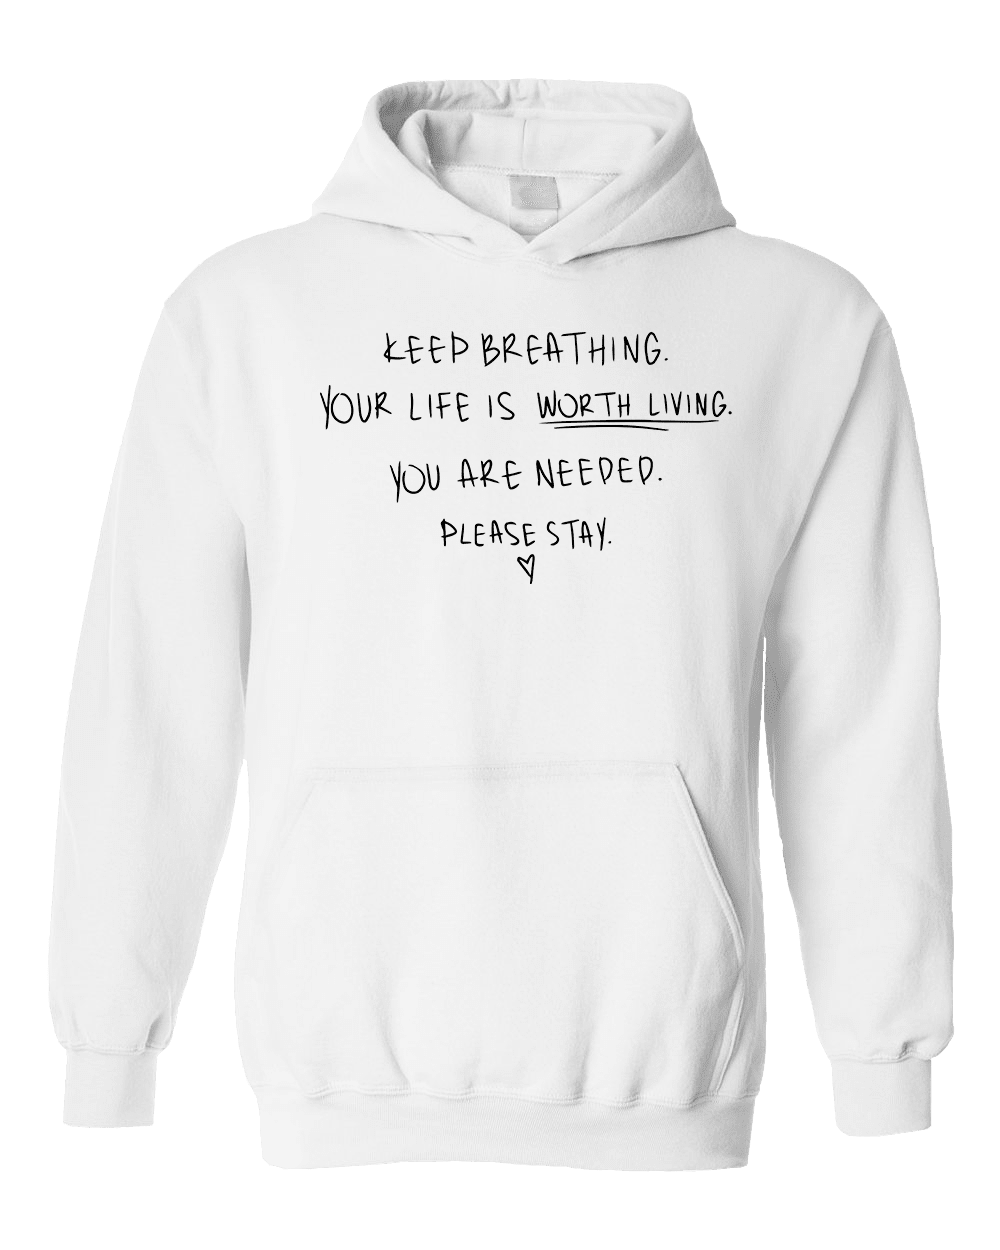 Hoodies – Self-Care Is For Everyone